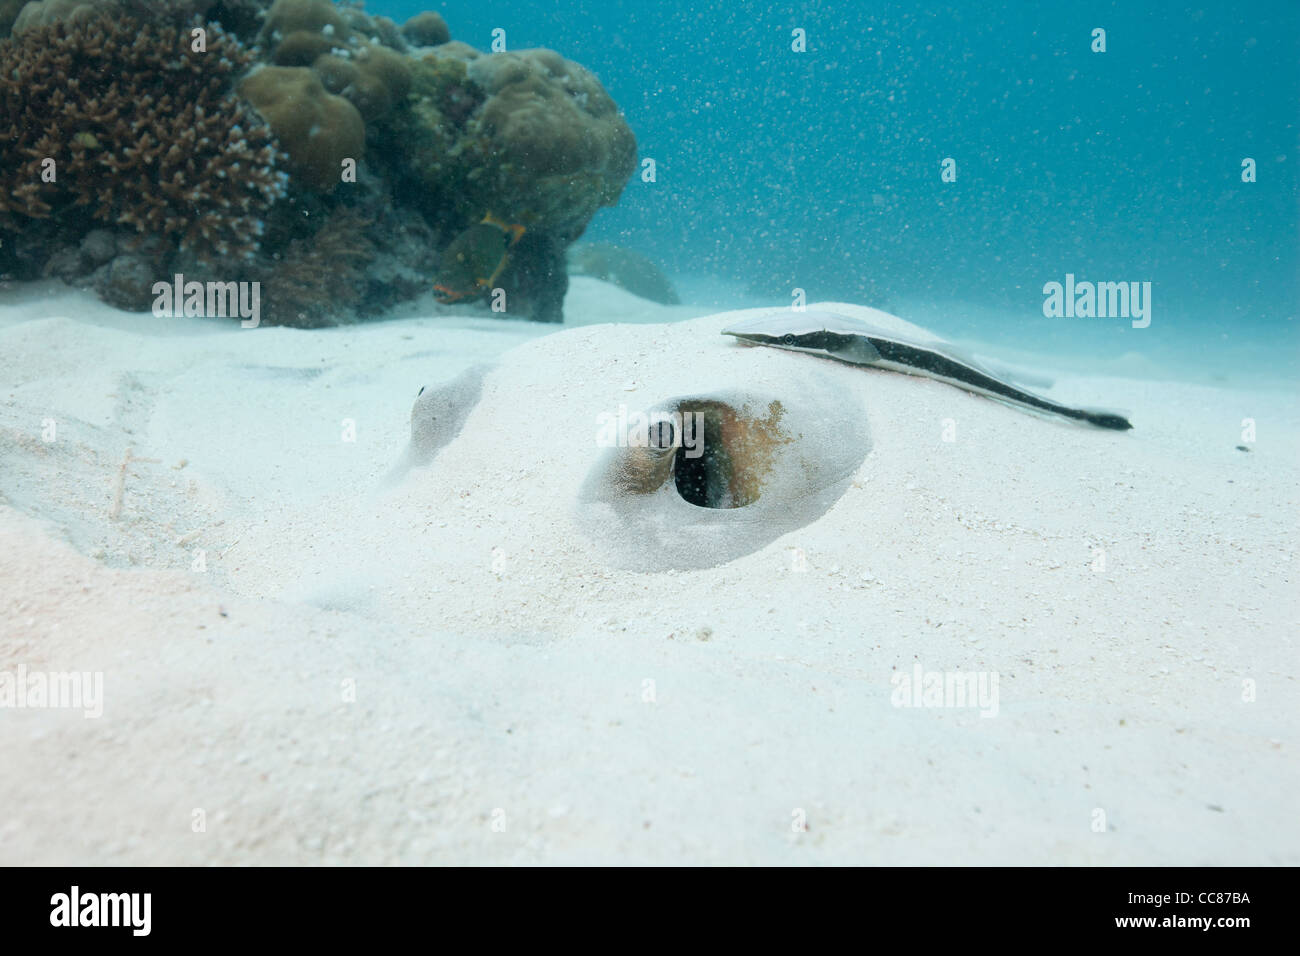 Cowtail Stingray (Pastinachus sephen) with a Remora (Remora sp.) resting in the sand Stock Photo